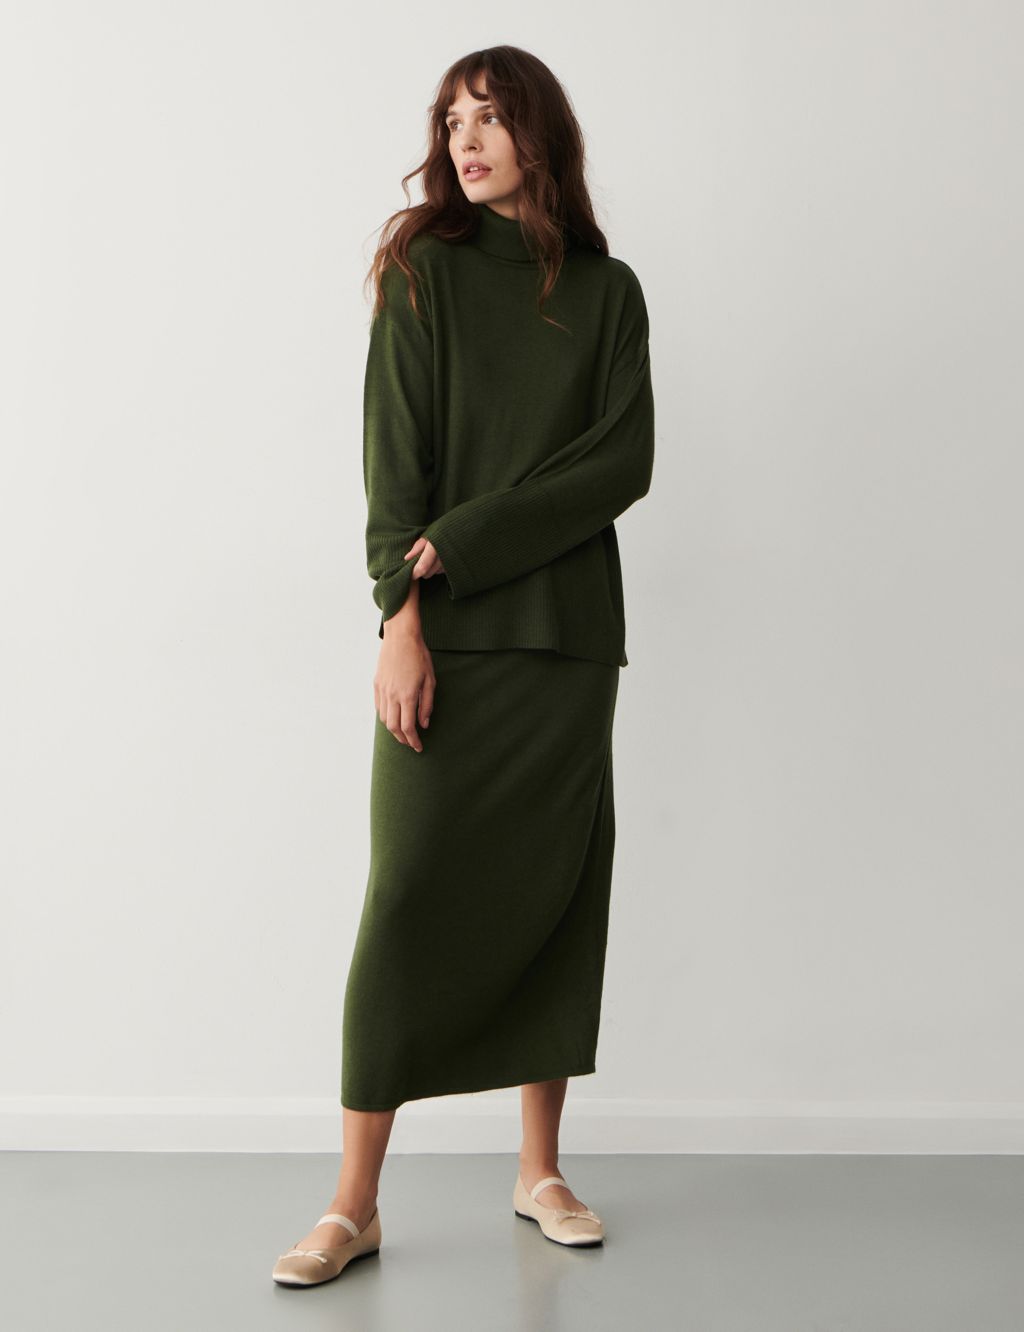 Knitted Midi A-Line Skirt